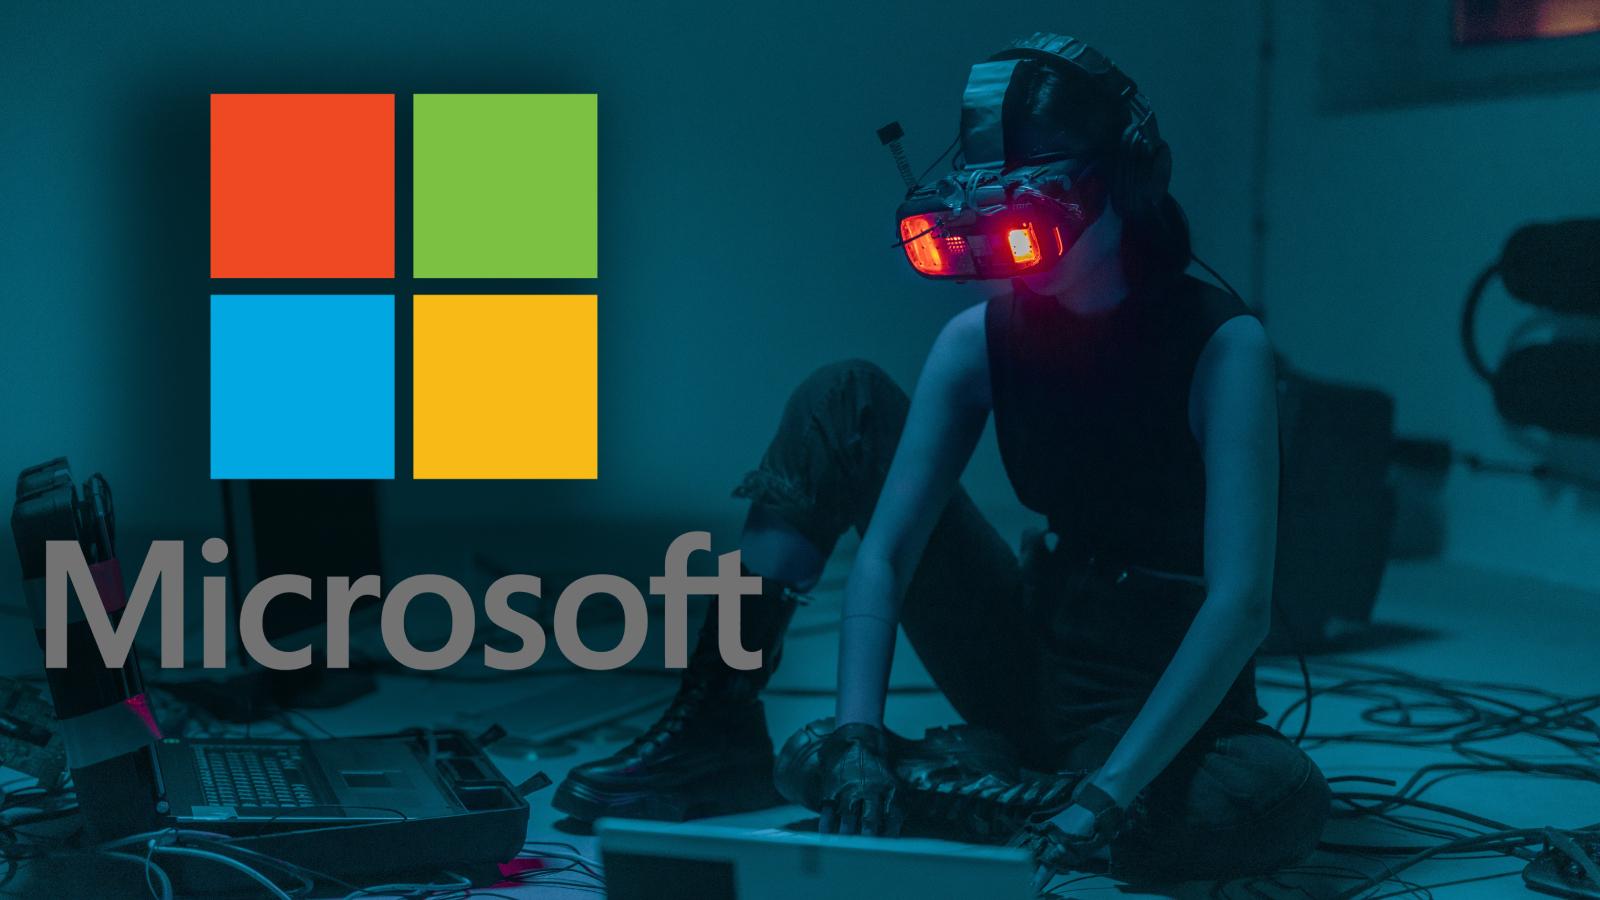 Microsoft logo next to a stock image of a hacker wearing a headset